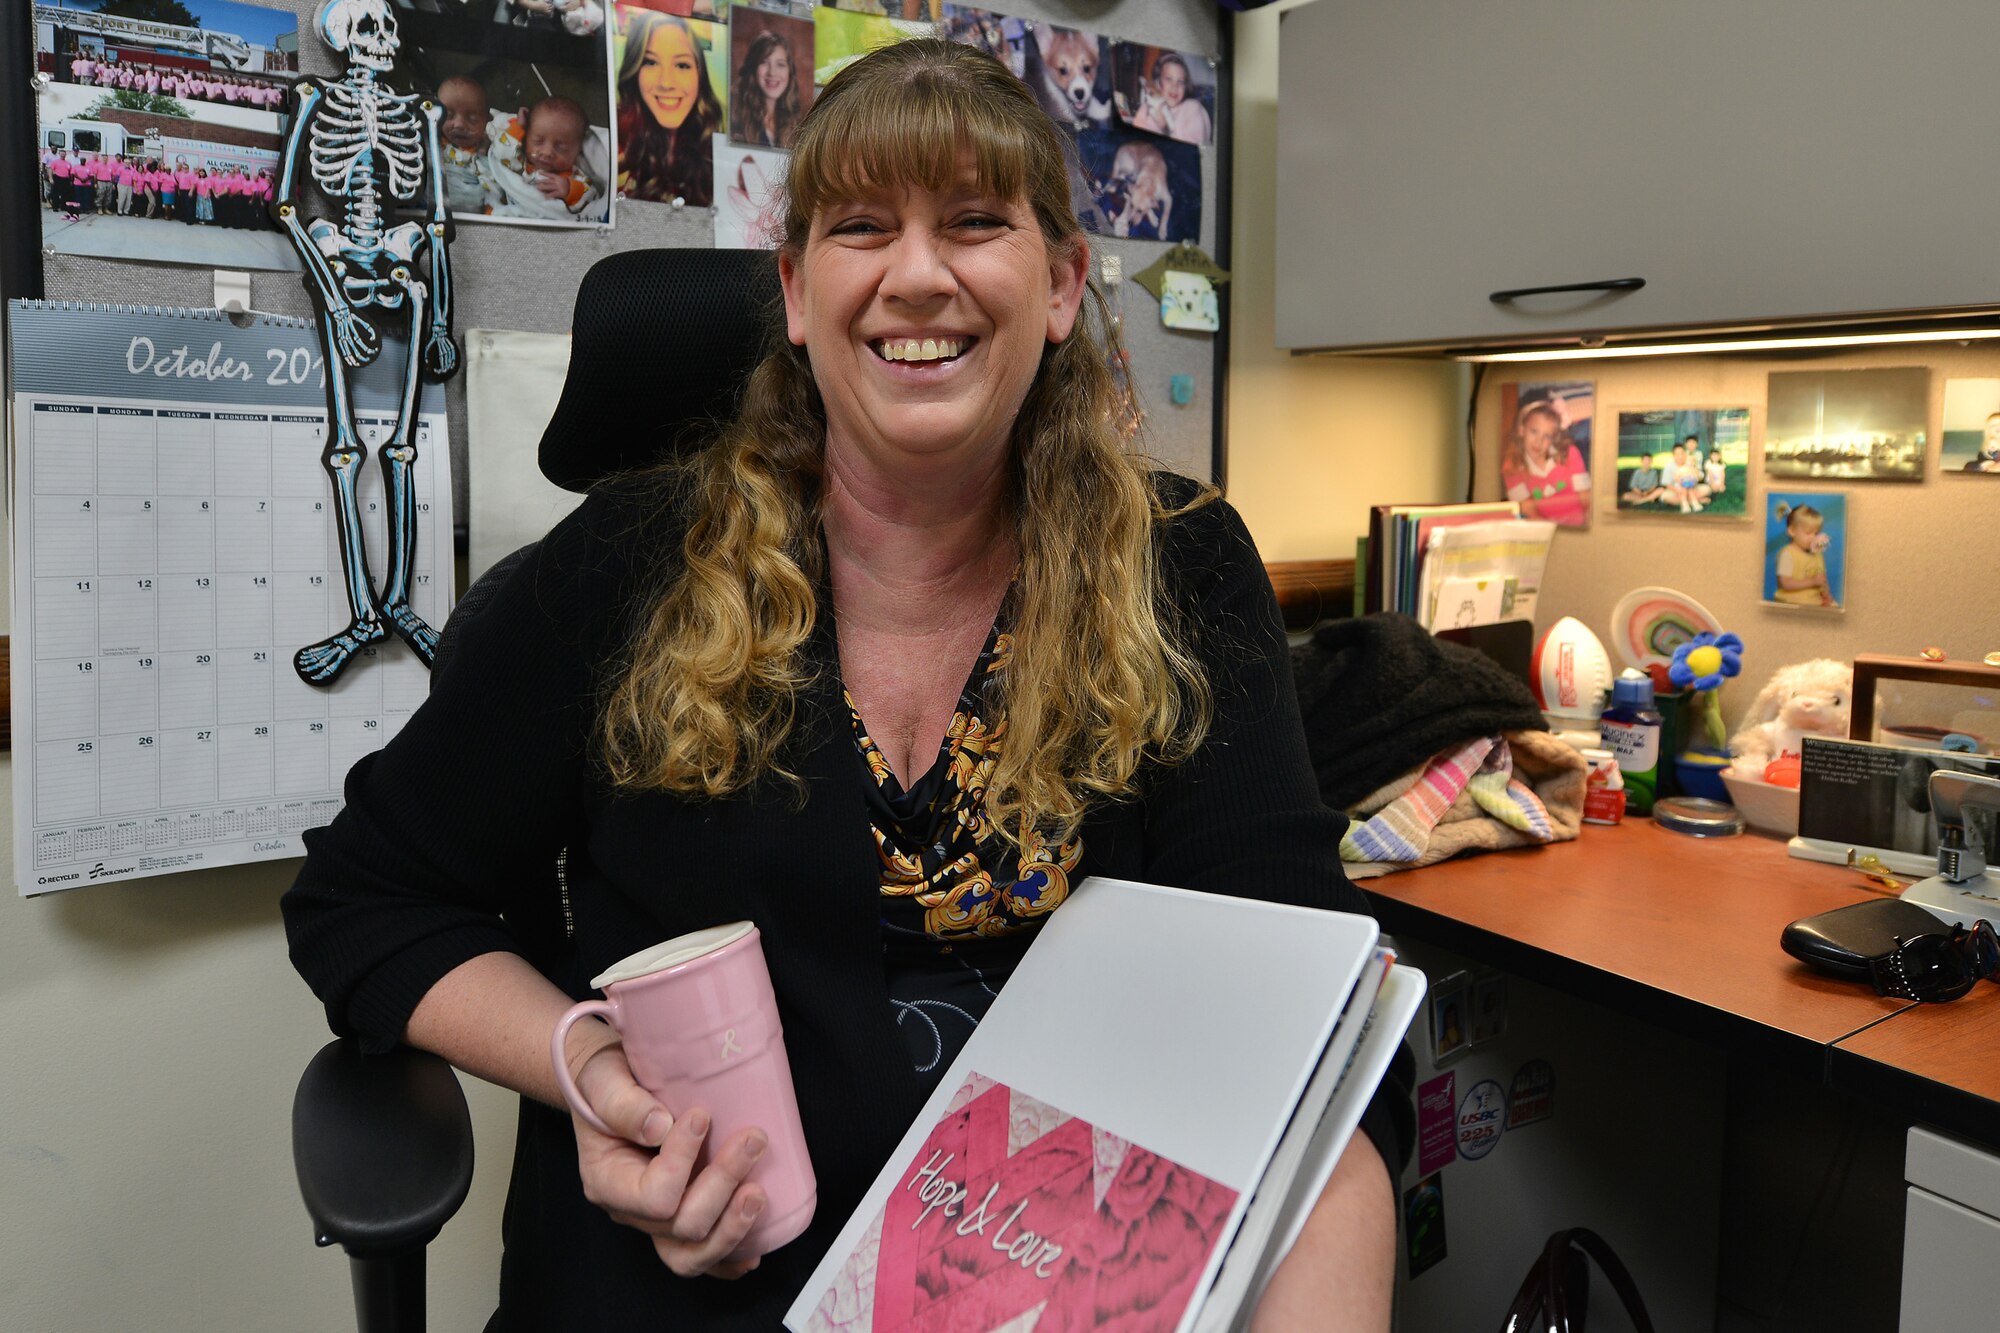 Donna Haynes, 733rd Civil Engineer Division environmental programs assistant, holds breast cancer awareness items at her desk at Fort Eustis, Va., Oct. 19, 2015. Haynes was diagnosed with breast cancer Sept. 24, 2015, and advocates the importance of receiving mammograms, as the checkup found the 8 millimeter sized cancerous tumor in her breast. (U.S. Air Force photo by Staff Sgt. Natasha Stannard/Released)